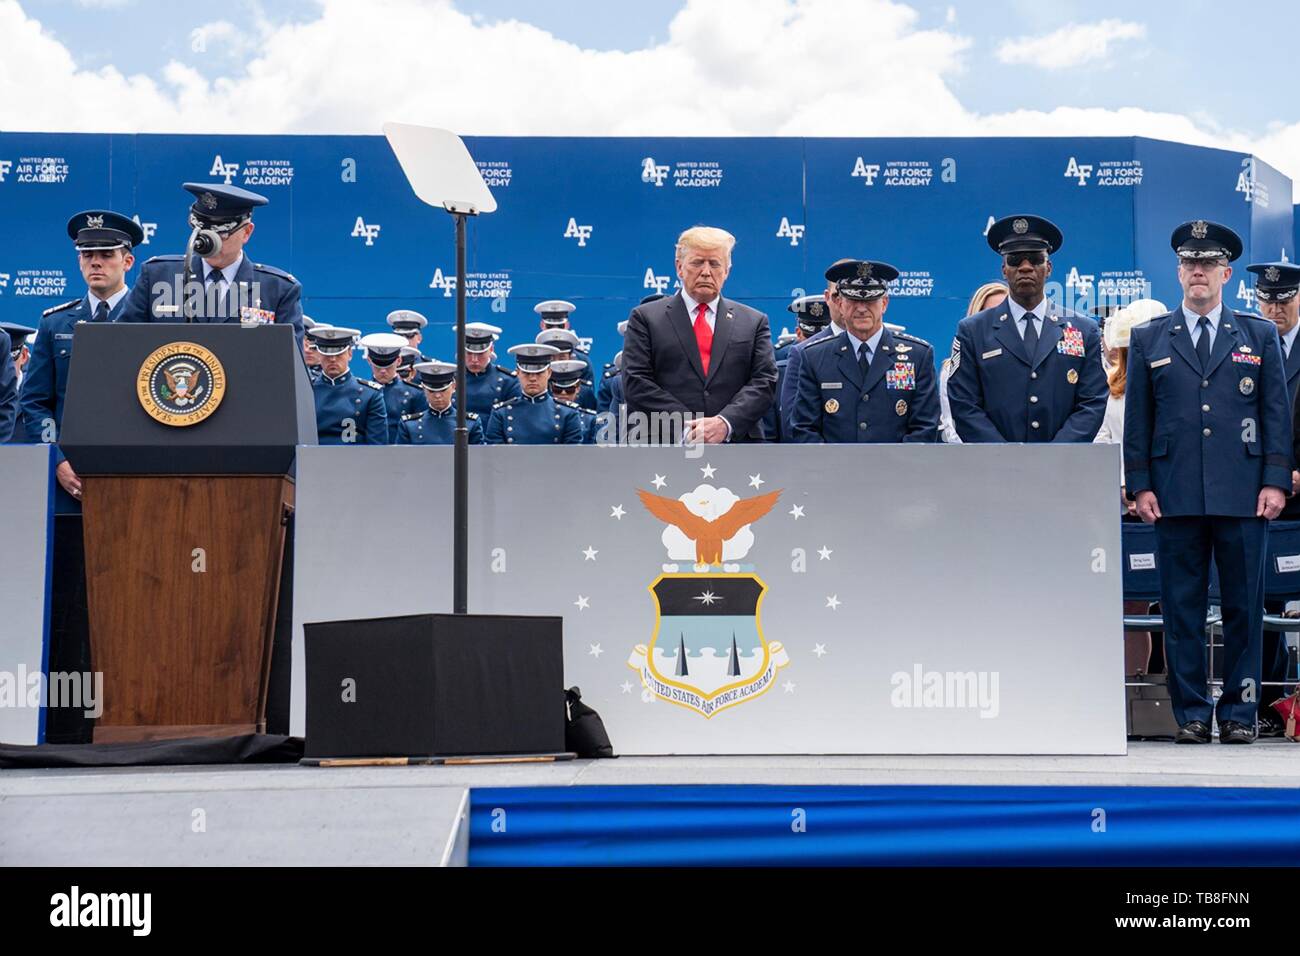 U.S President Donald Trump stands for the invocation during the U.S. Air Force Academy Graduation Ceremony at the USAF Academy Falcon Stadium May 30, 2019 in Colorado Springs, Colorado. Credit: Planetpix/Alamy Live News Stock Photo